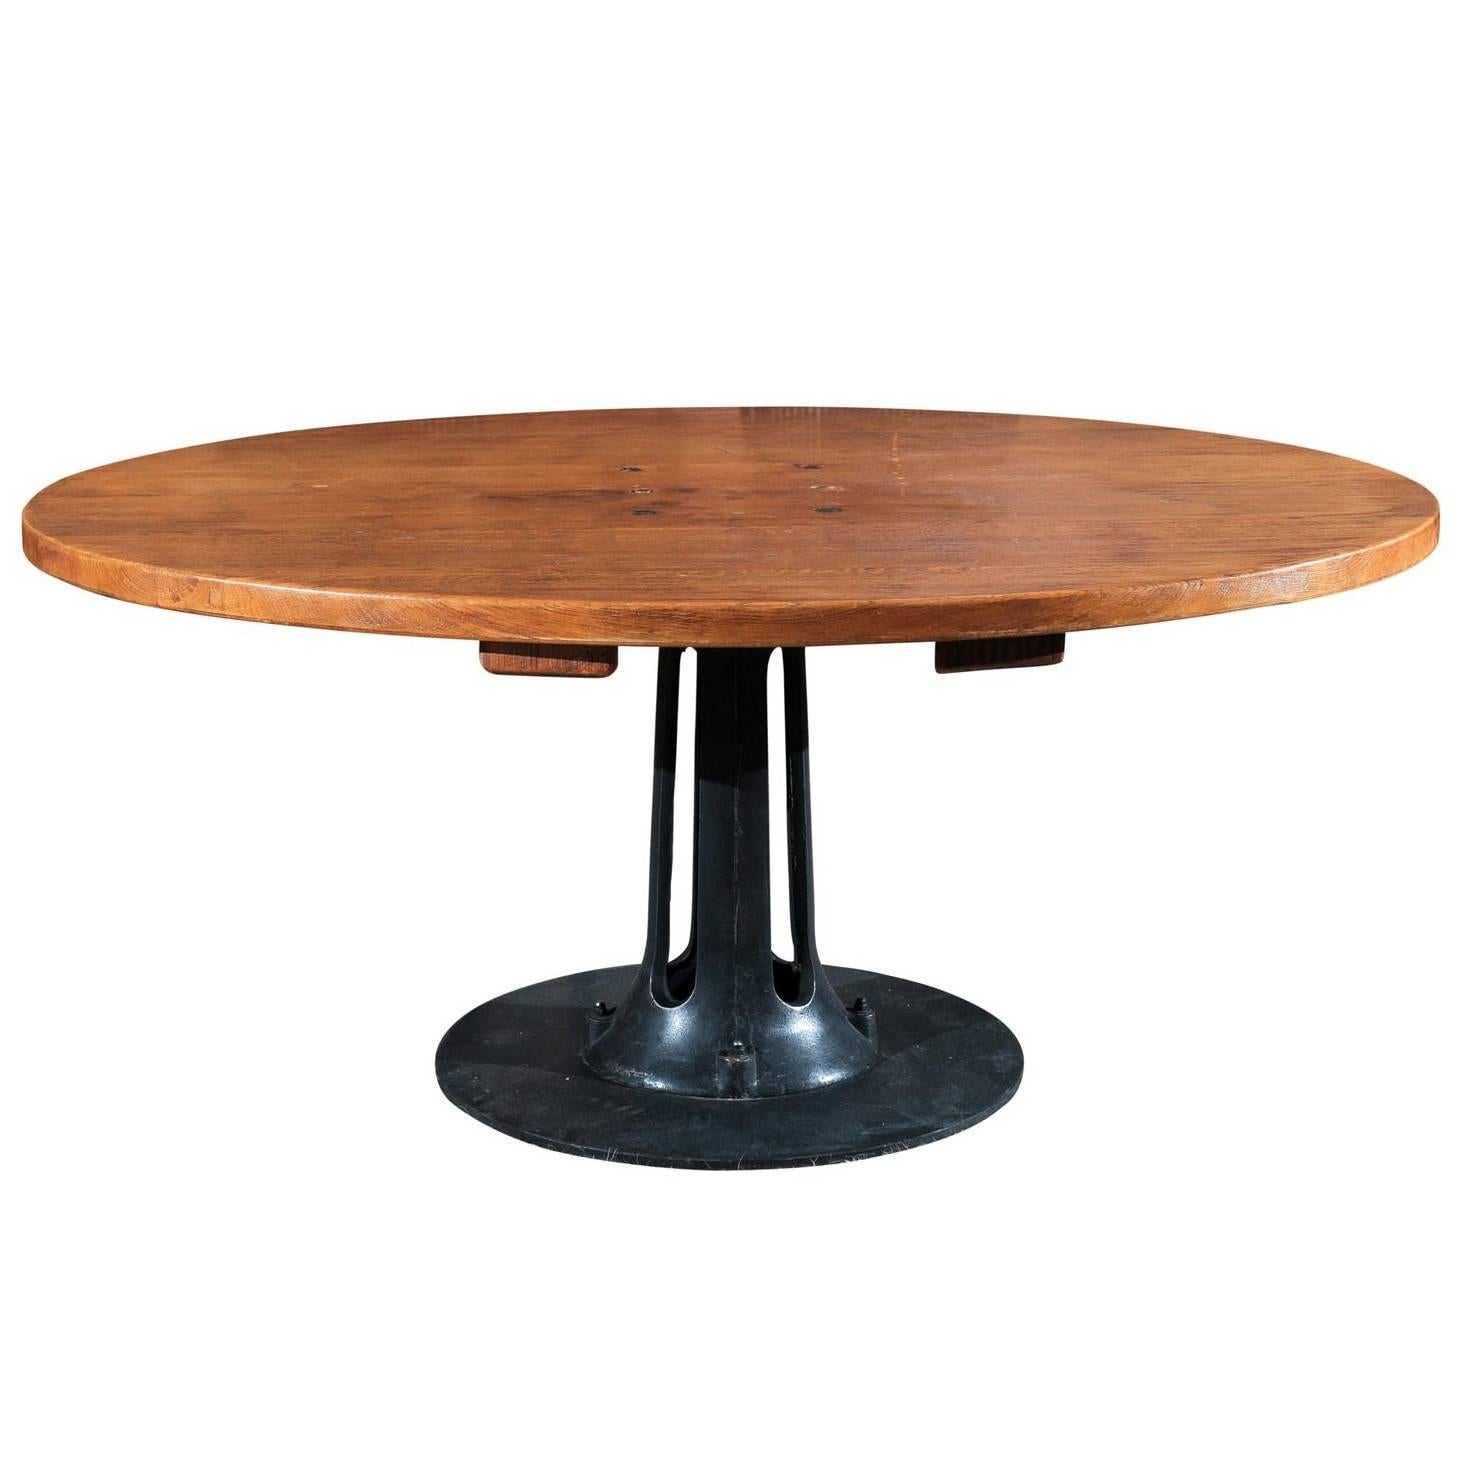 Early 20th Century French Industrial Oak Oval Table